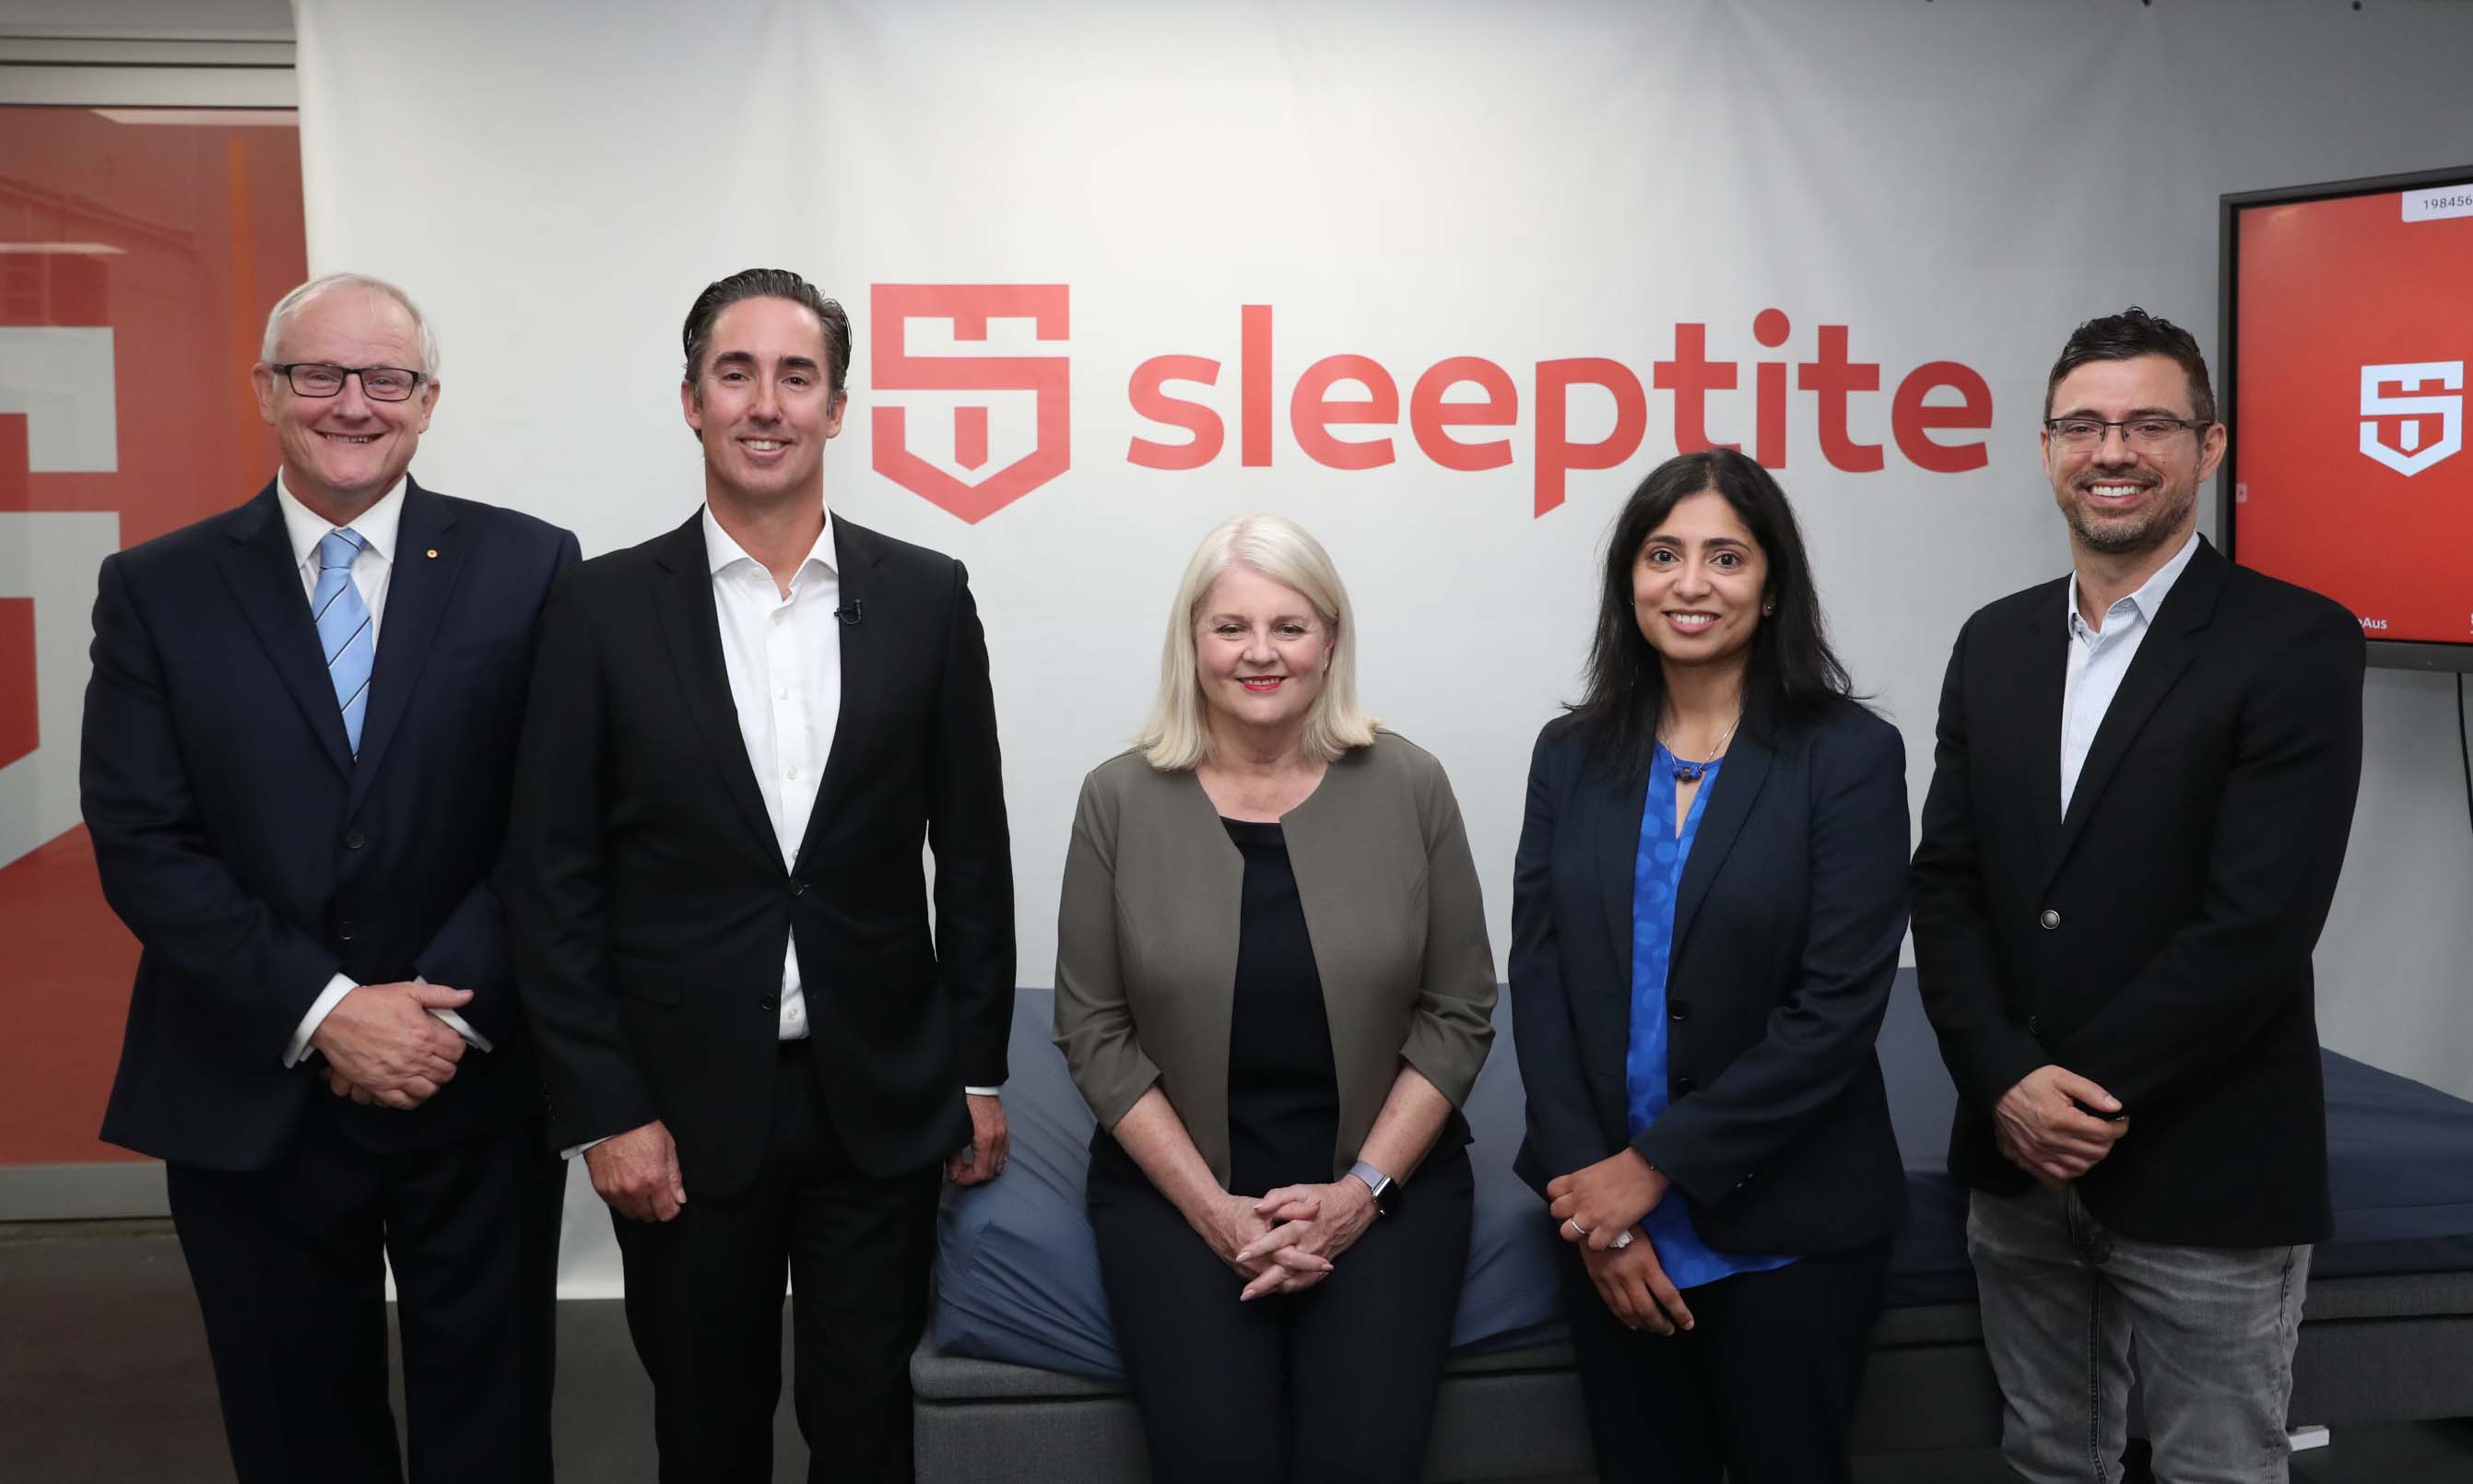 RMIT Deputy Vice-Chancellor Research and Innovation and Vice-President, Professor Calum Drummond, Sleeptite CEO Cameron van den Dungen, Federal Minister for Industry, Science and Technology, Karen Andrews, lead researcher Professor Madhu Bhaskaran and Bill Mantzis, Managing Director Sleepeezee Bedding Australia. 